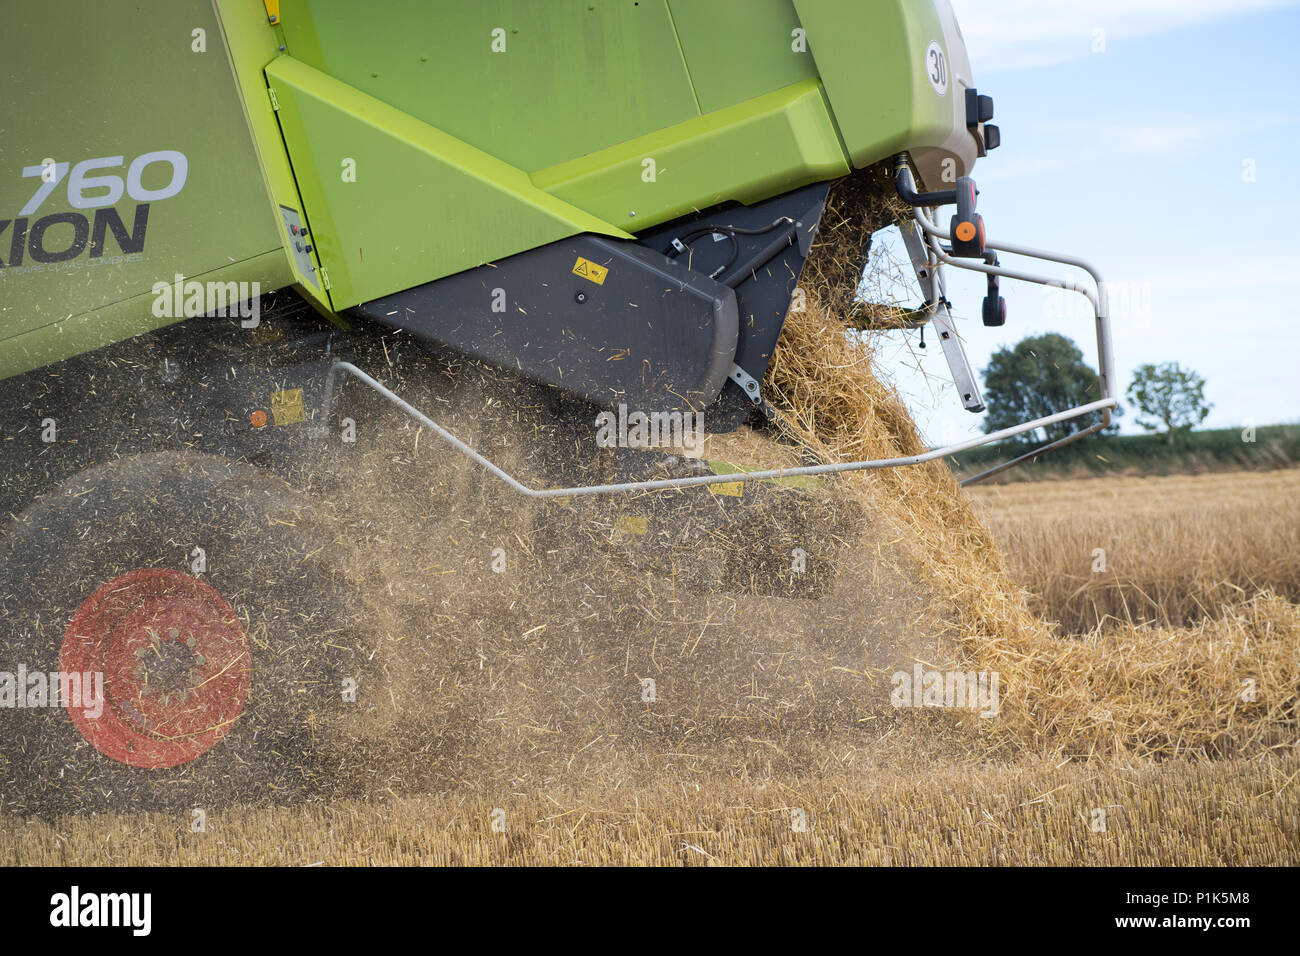 Claas Lexicon 760 combining barley, with straw coming out of rear discharge. Yorkshire, UK. Stock Photo